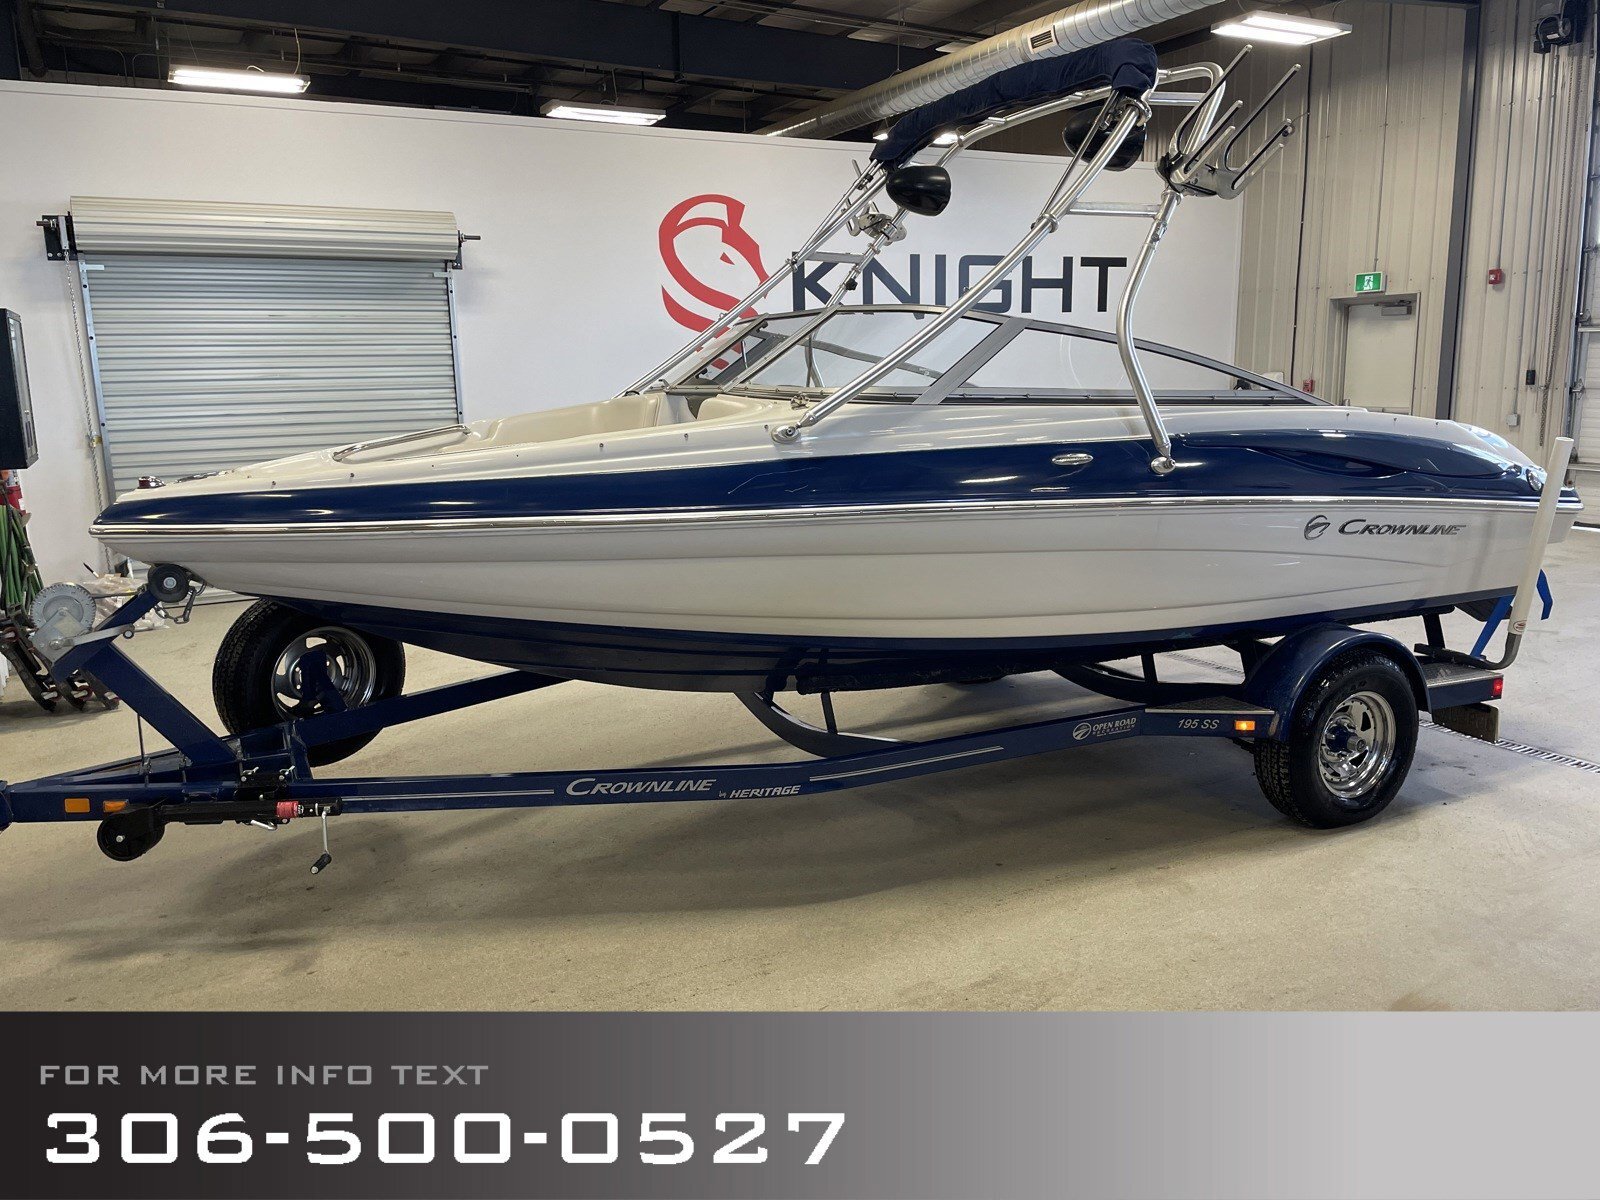 2012 Crownline 195SS With Tower, Wet sound stereo, low hours, local tra